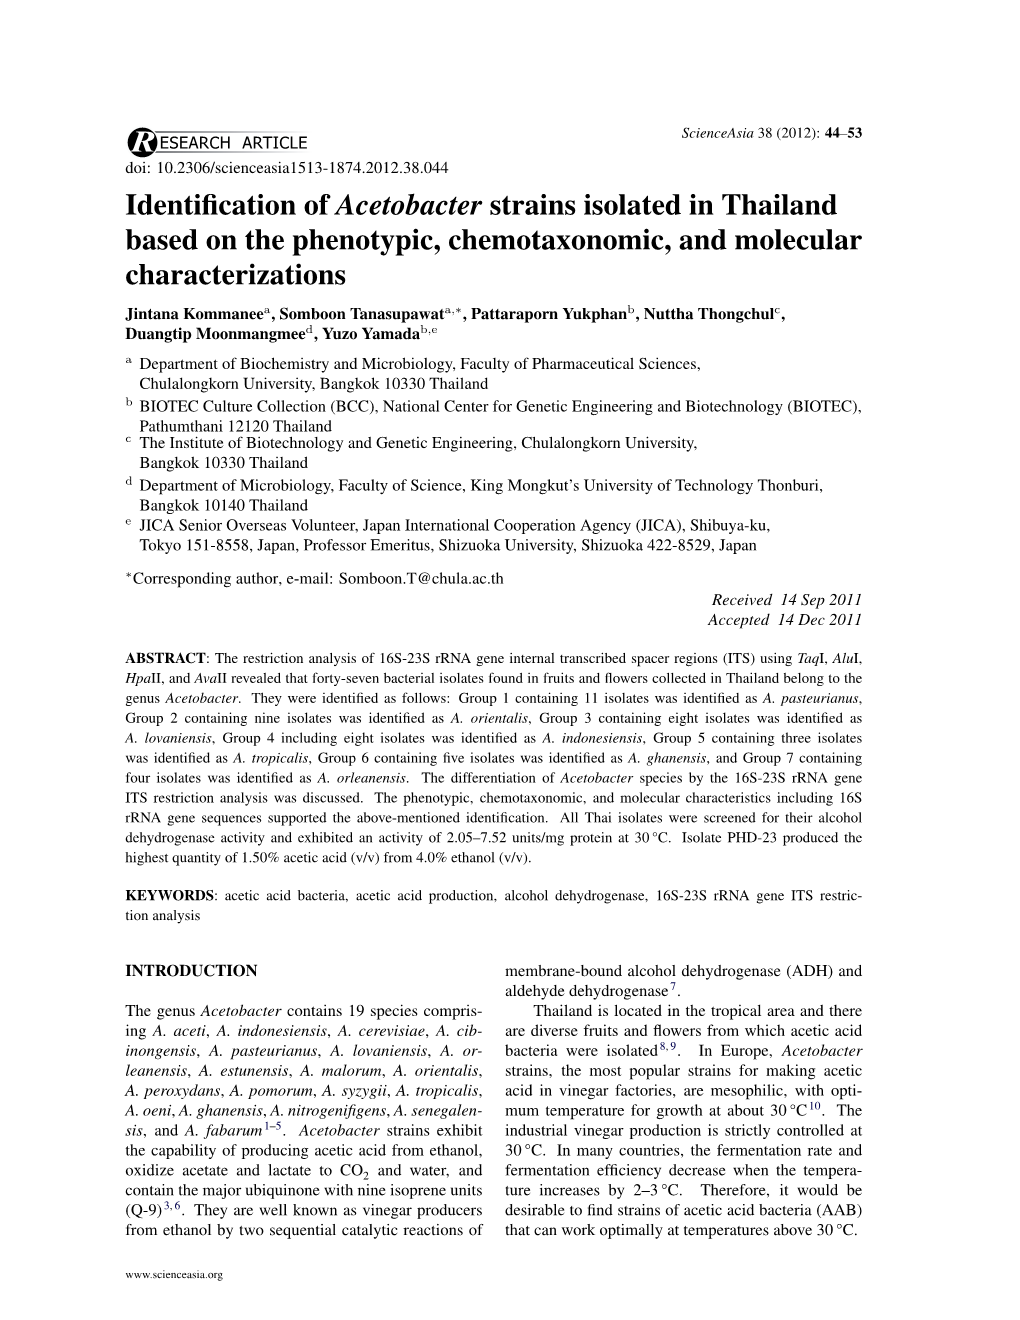 Identification of Acetobacter Strains Isolated in Thailand Based on The